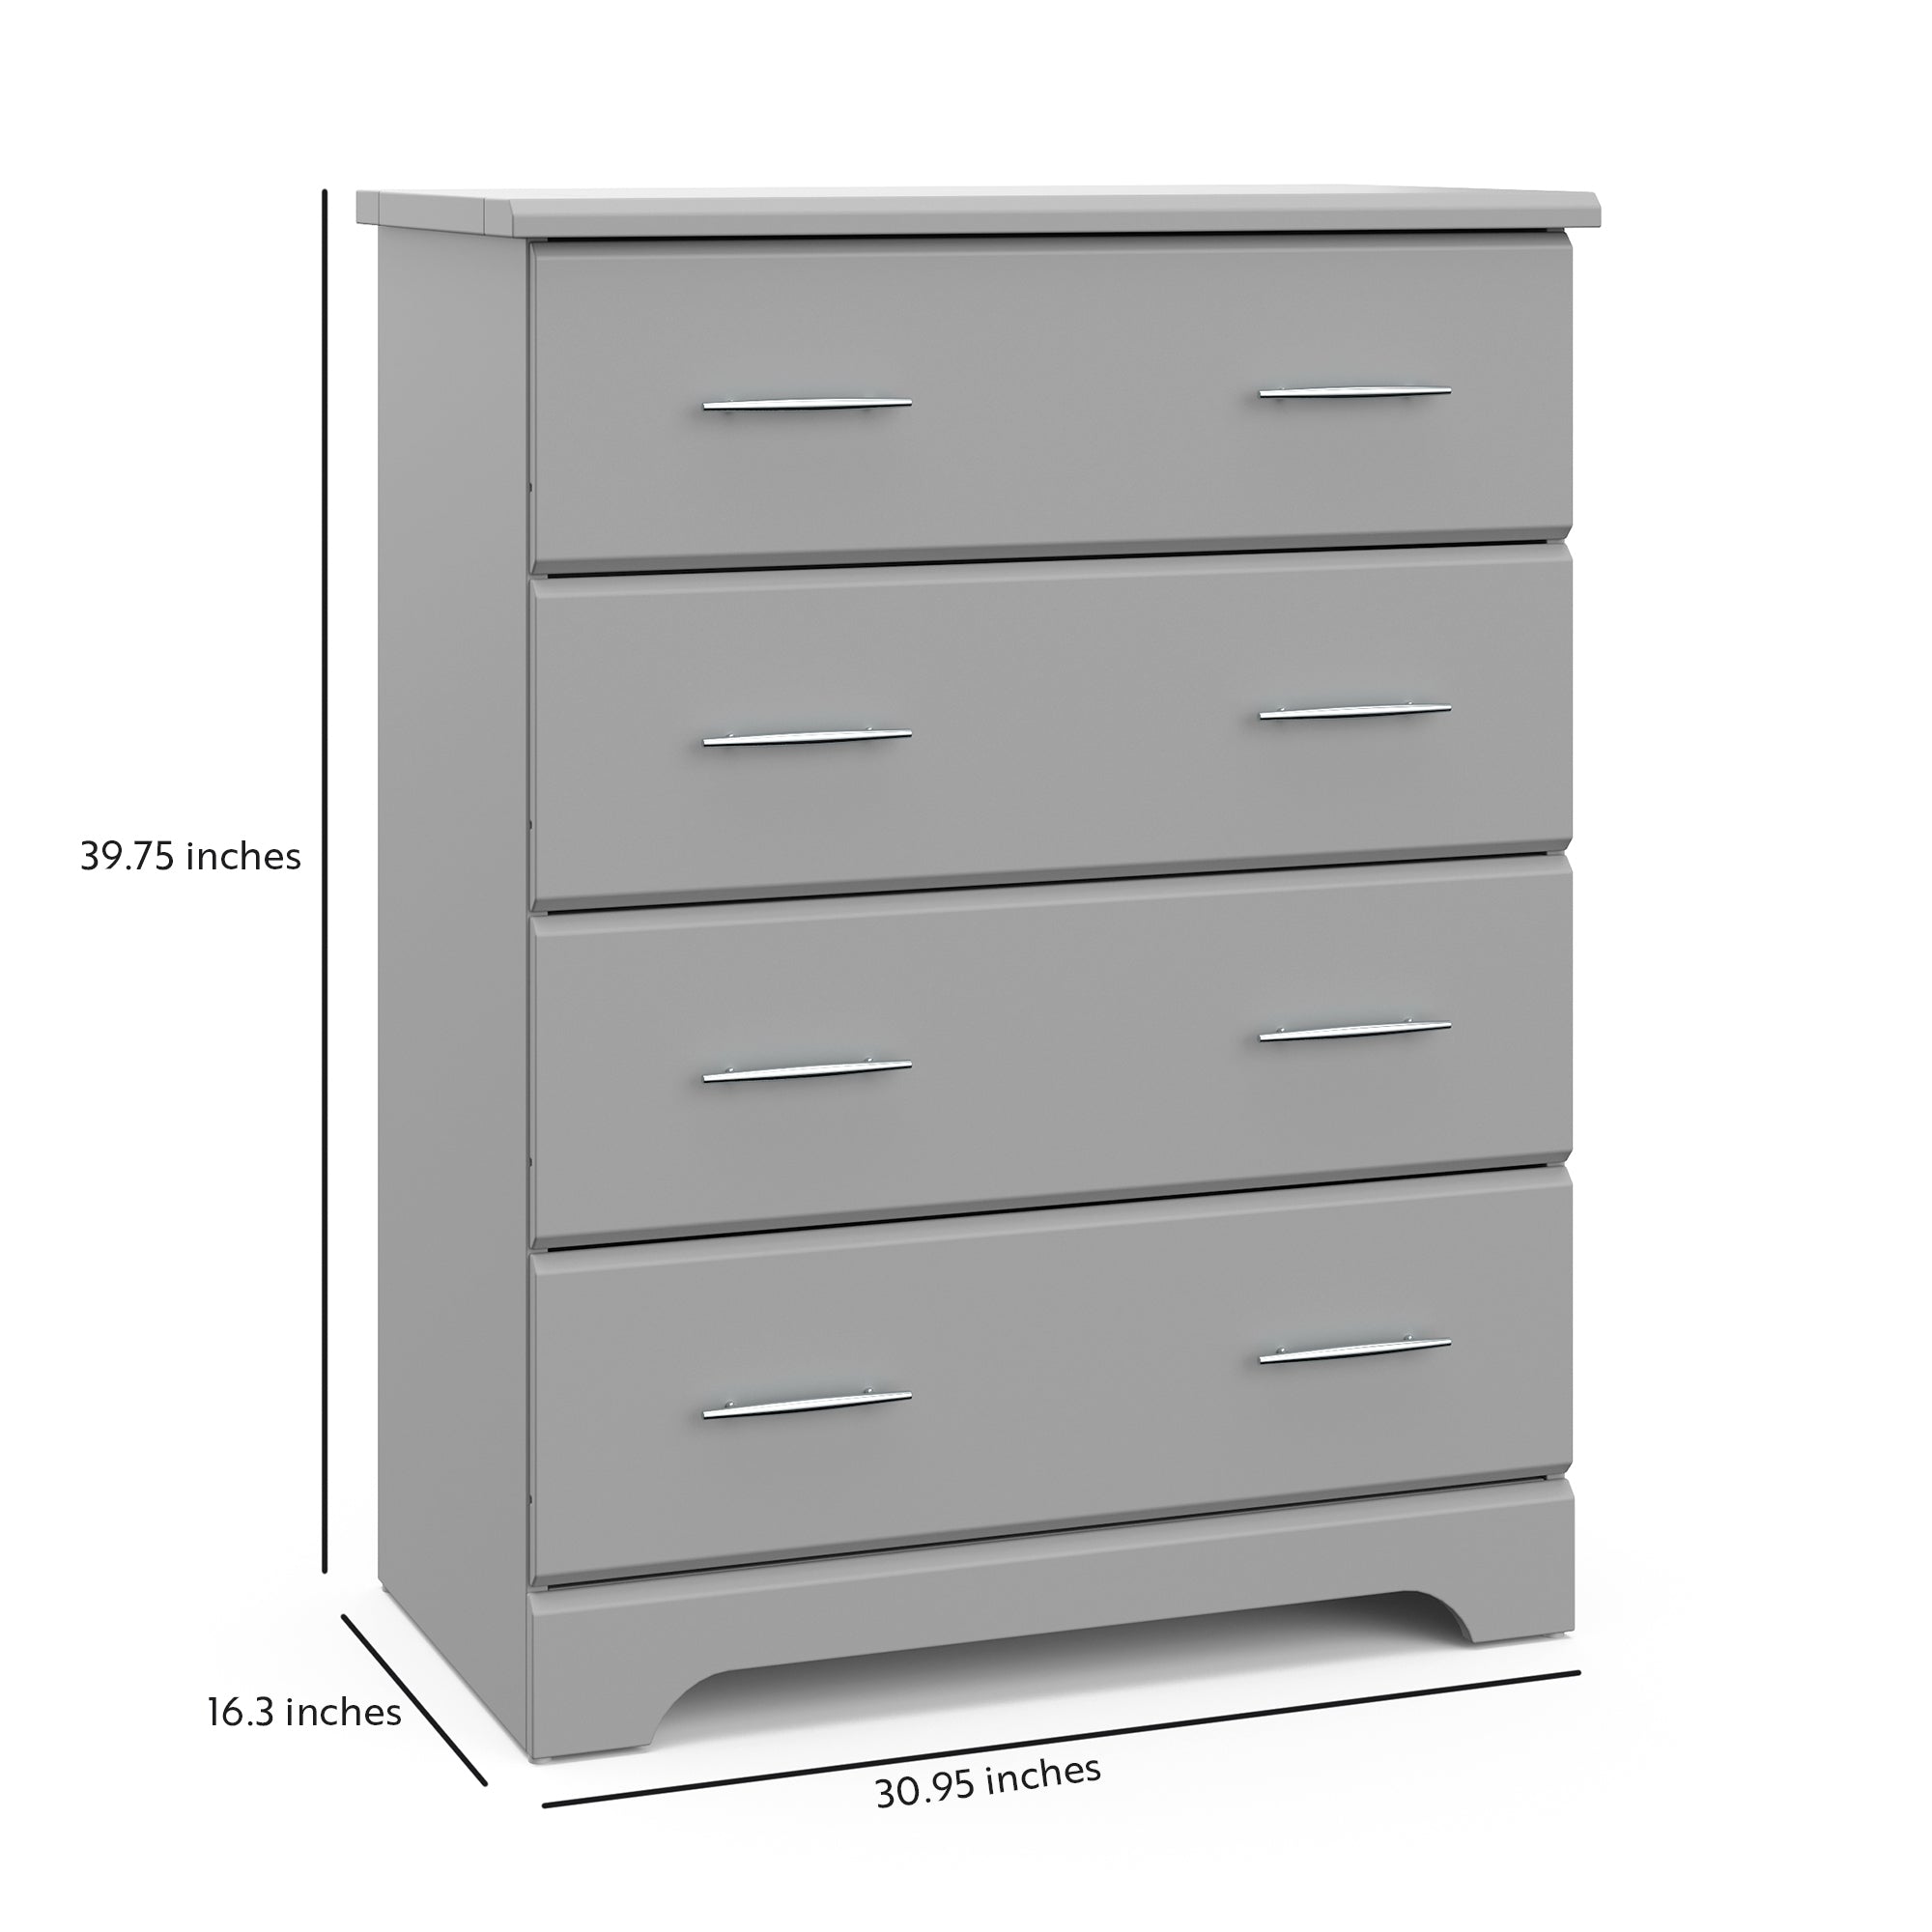 Pebble gray 4 drawer chest with dimensions